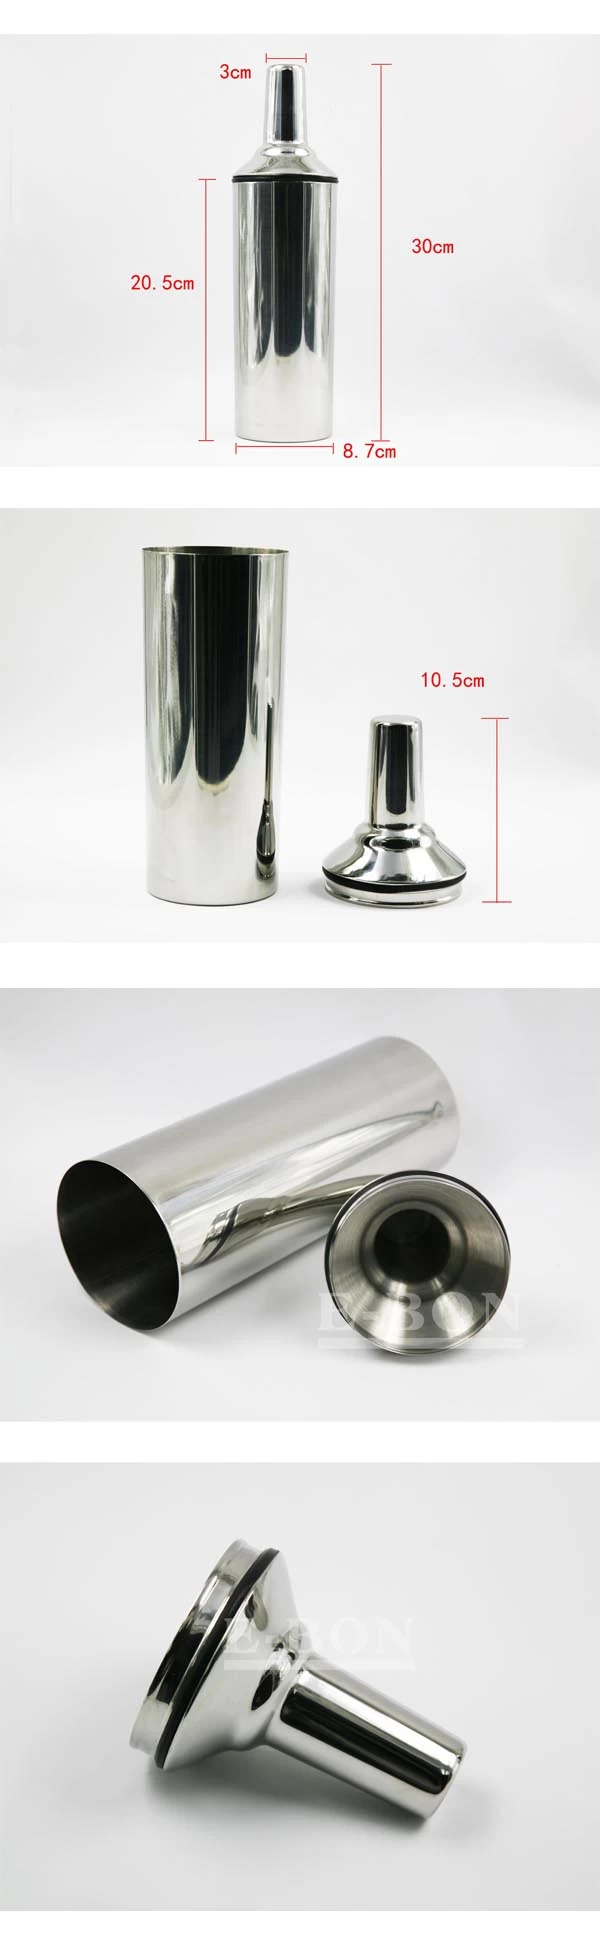 Stainless steel Cocktail Shaker